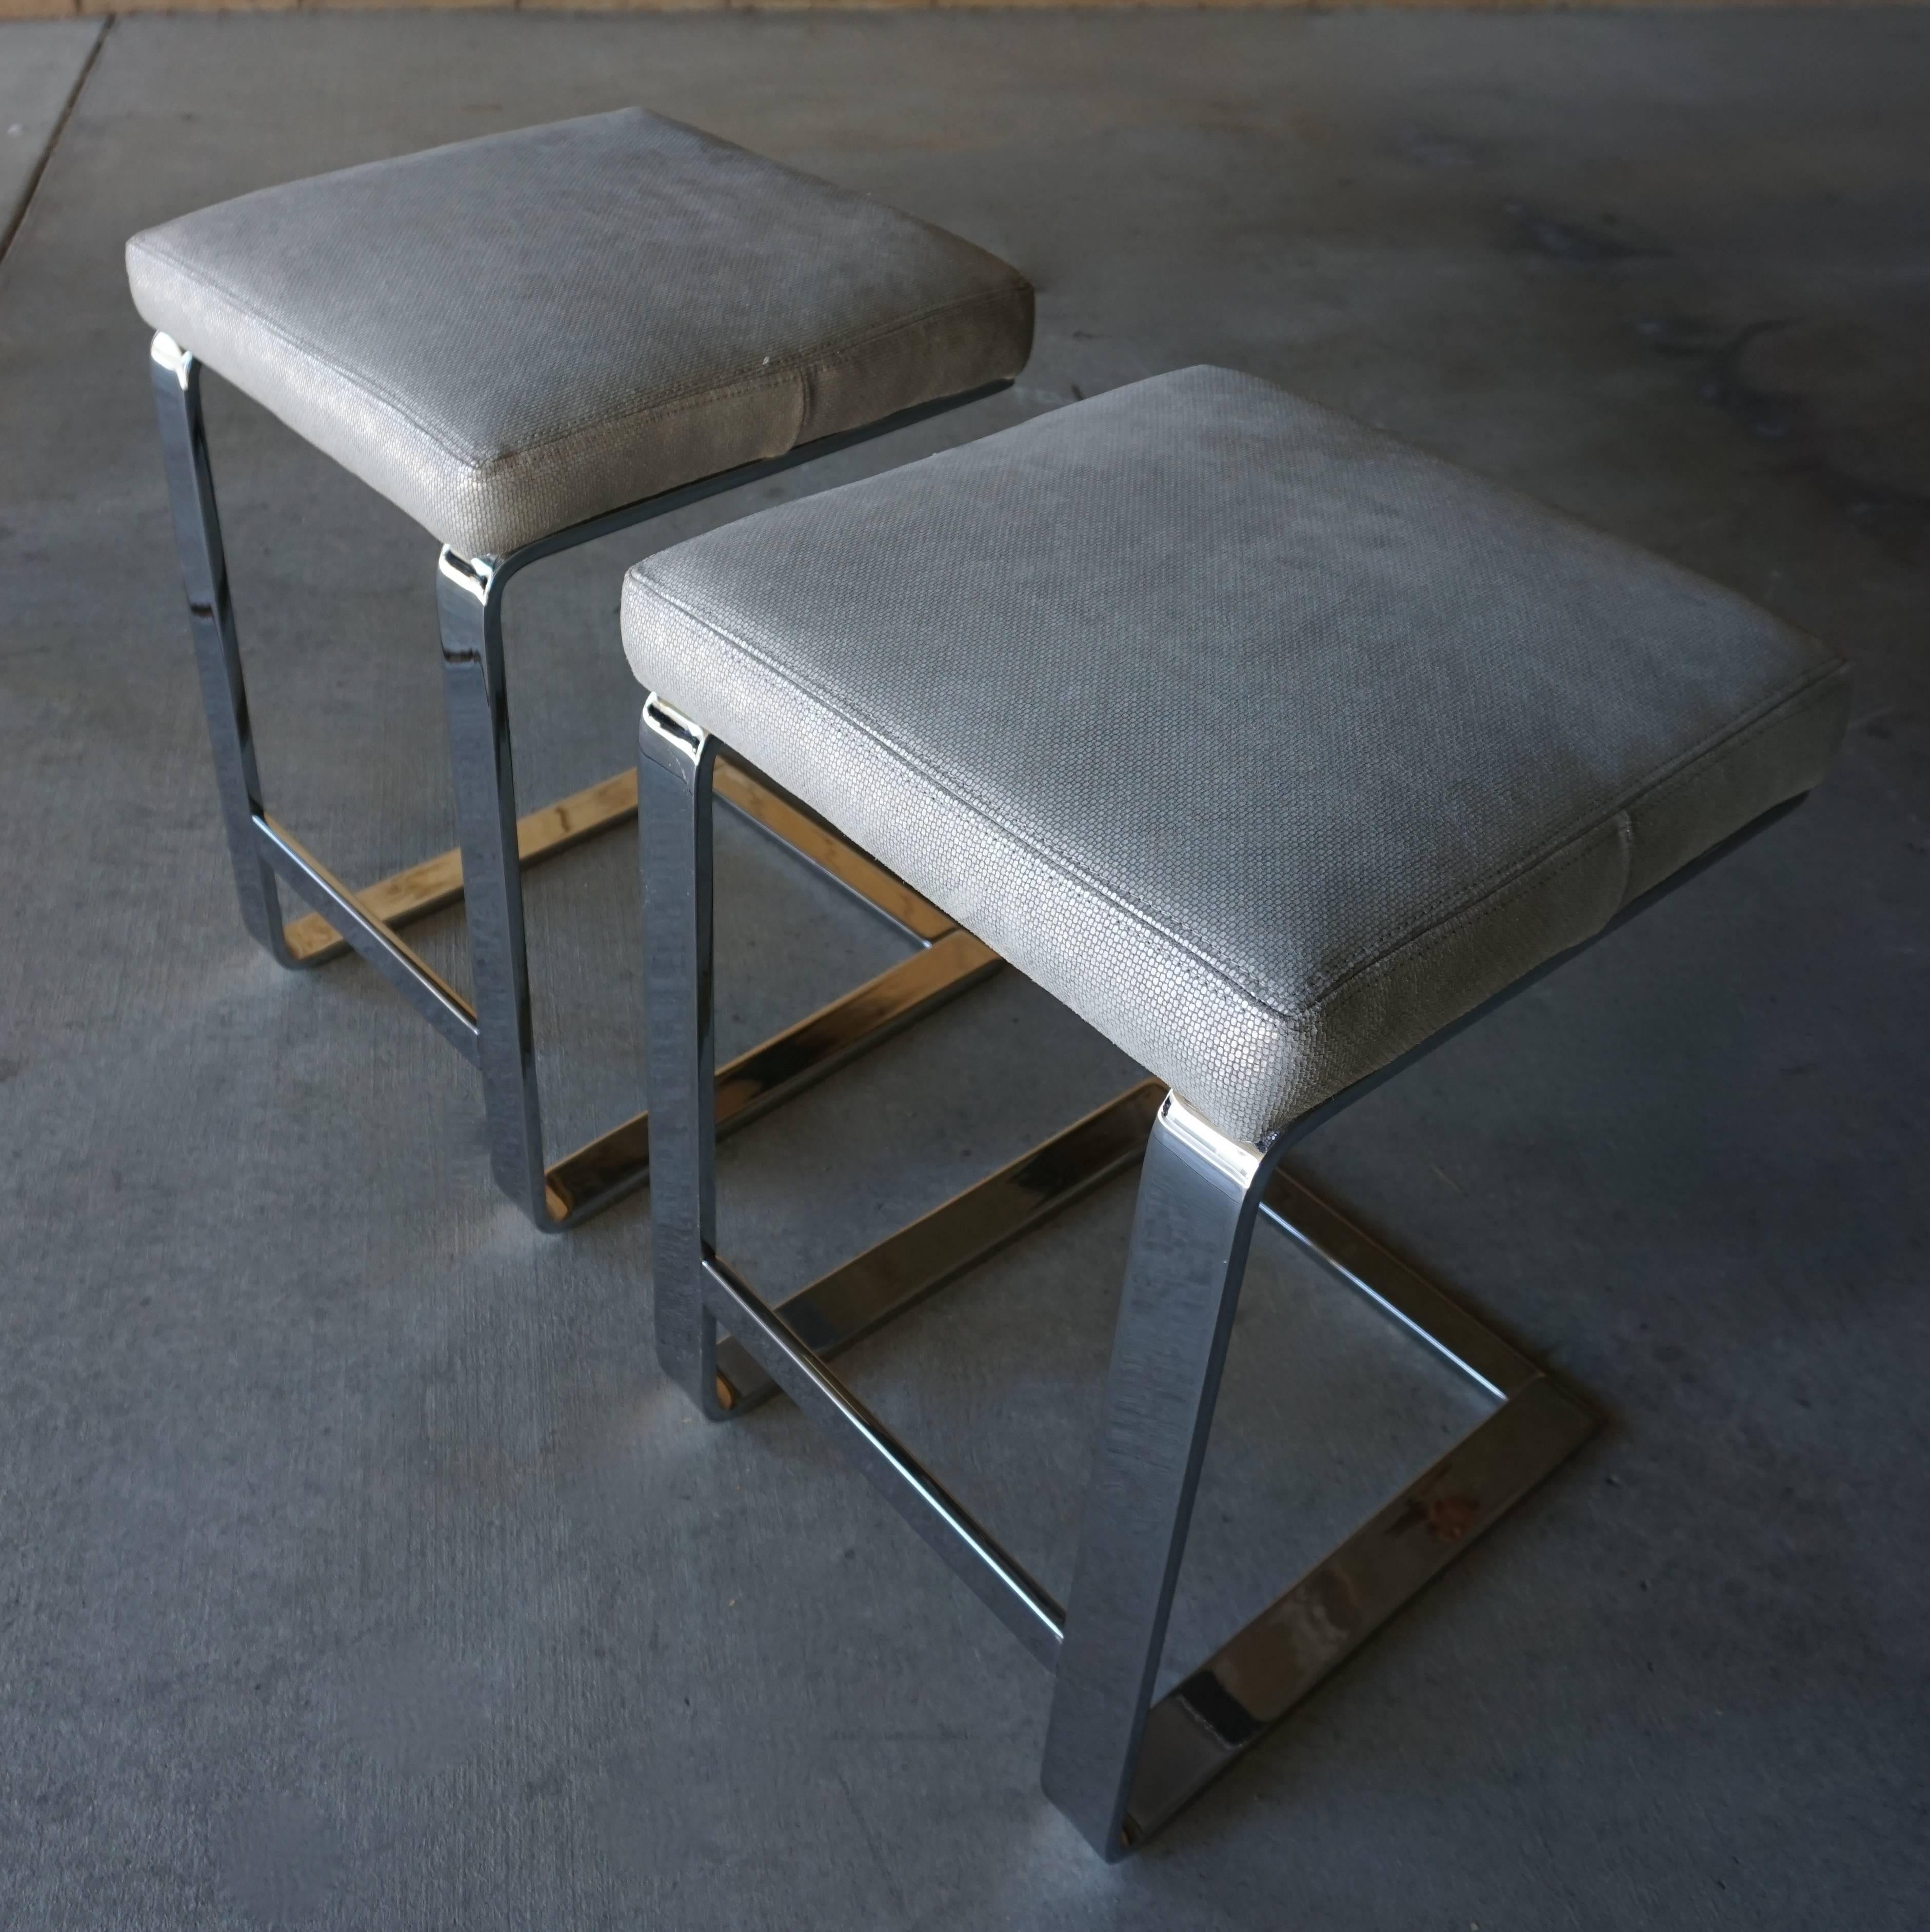 A pair of nickel plated steel counter height stools attributed to Leon Rosen for Pace in the 1970s. The bases are a combination of solid and hollow flat bar steel and the seat are newly reupholstered in a soft and textured silver leather. The